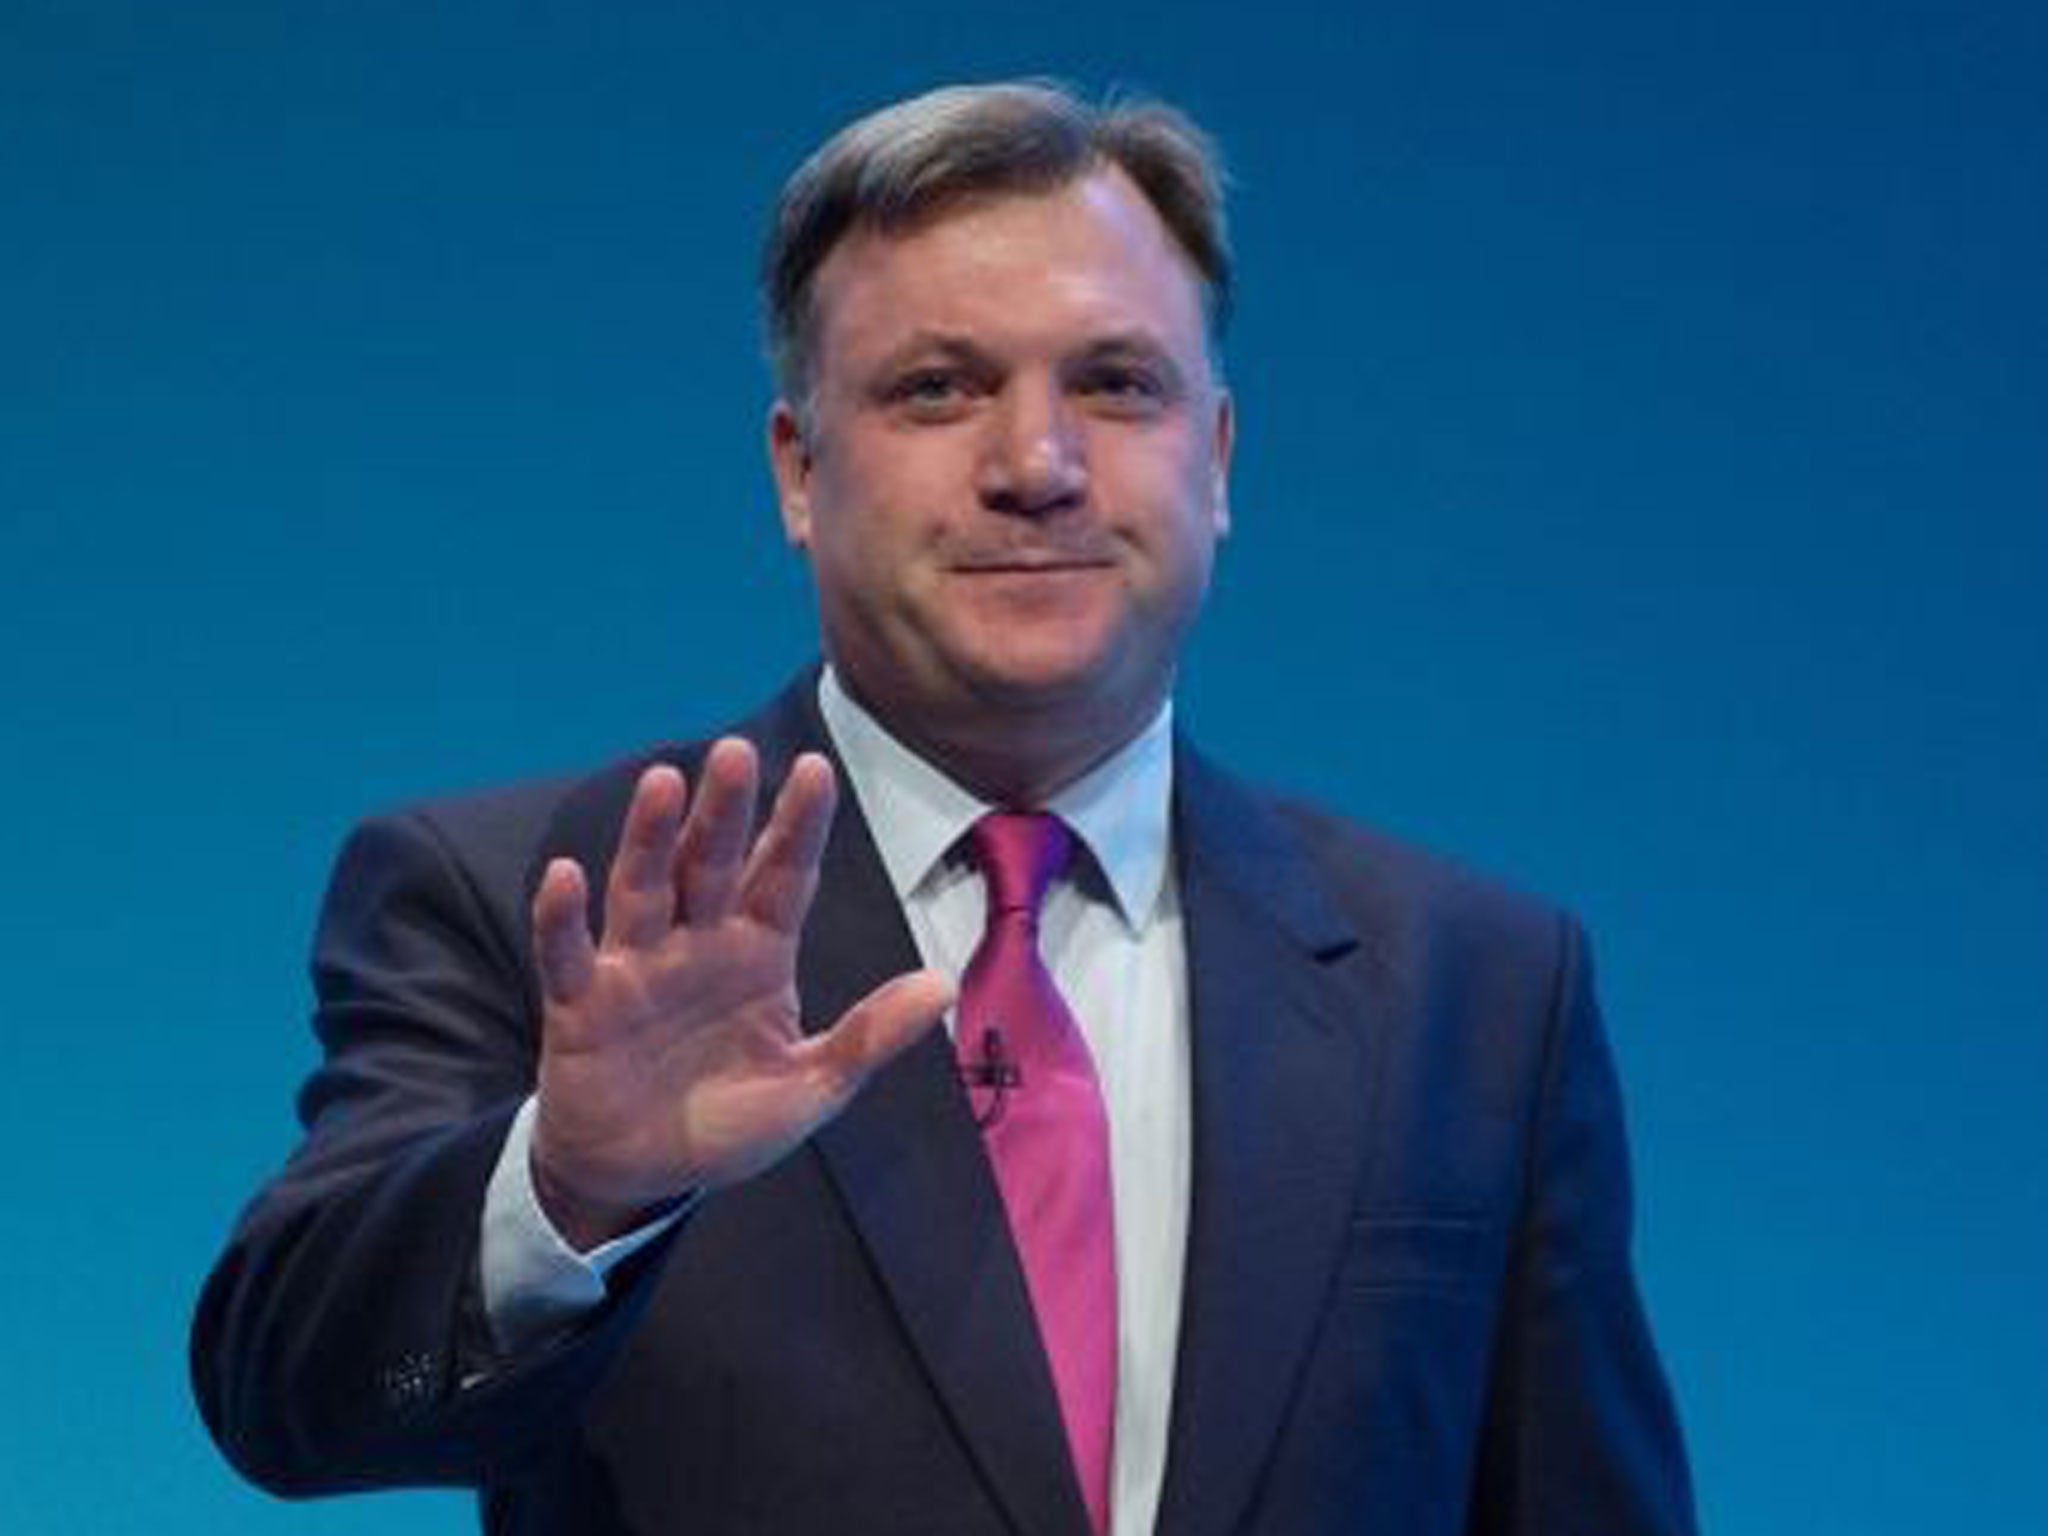 Coalition? Lib Dem leader would not object to Ed Balls if their parties formed a new pact in 2015